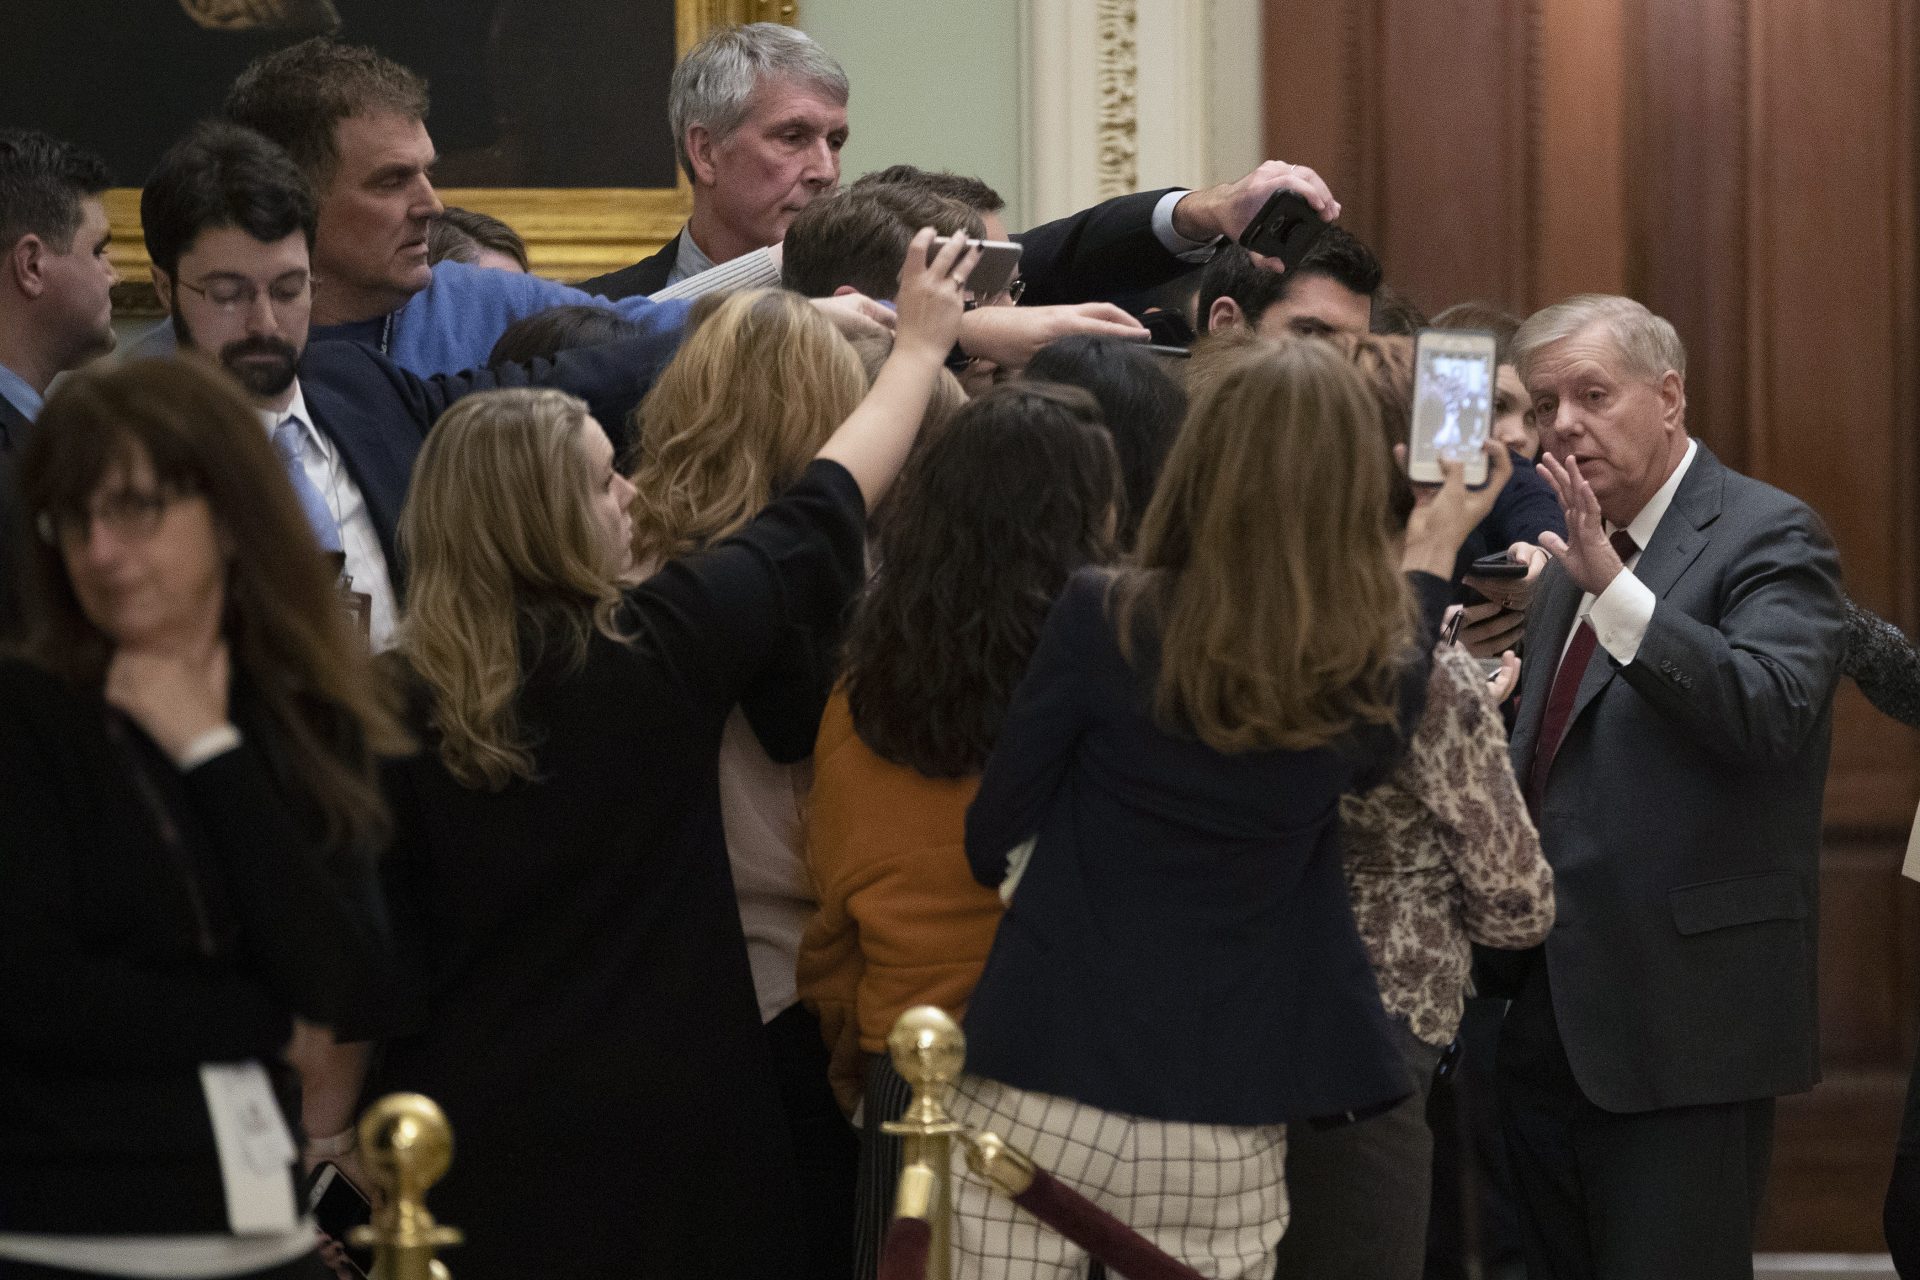 Sen. Lindsey Graham, R-S.C., talks to the media outside the Senate chamber during the impeachment trial of President Donald Trump at the Capitol, Thursday, Jan. 23, 2020, in Washington.